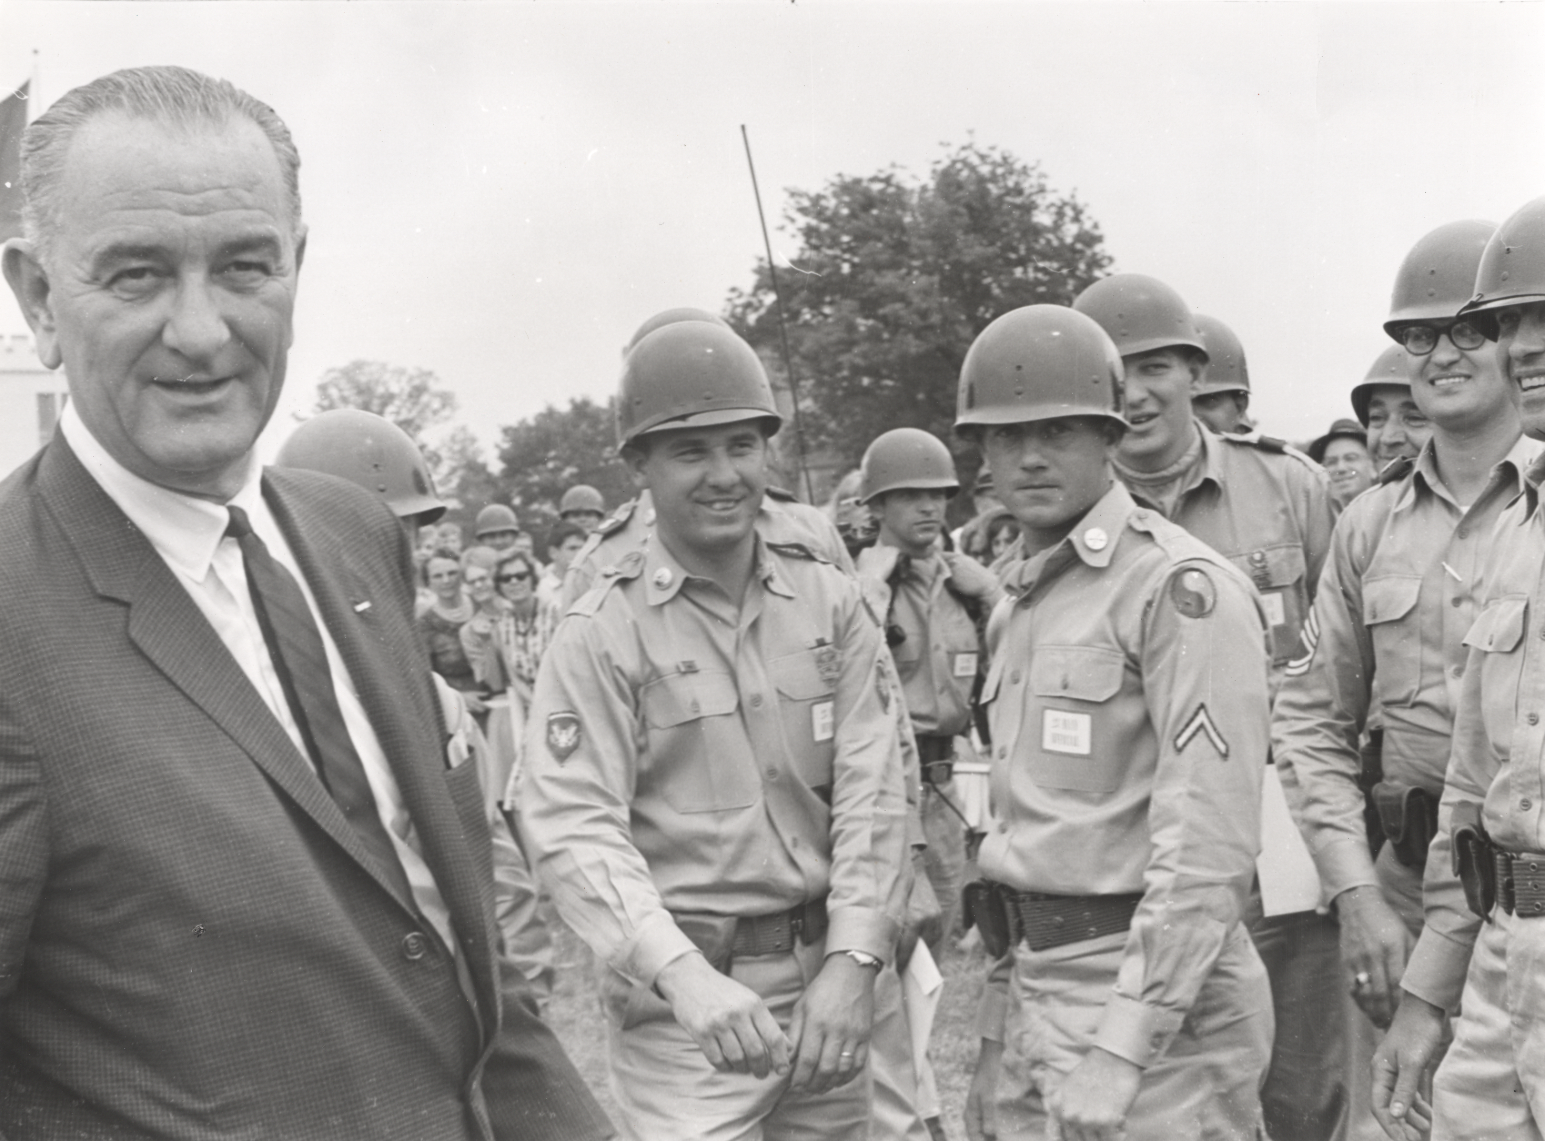 President Lyndon B. Johnson with his Army entourage after his arrival at the dedication of the George C. Marshall Research Library, May 23, 1964. The soldiers shown are from the Virginia National Guard's 29th Infantry Division.